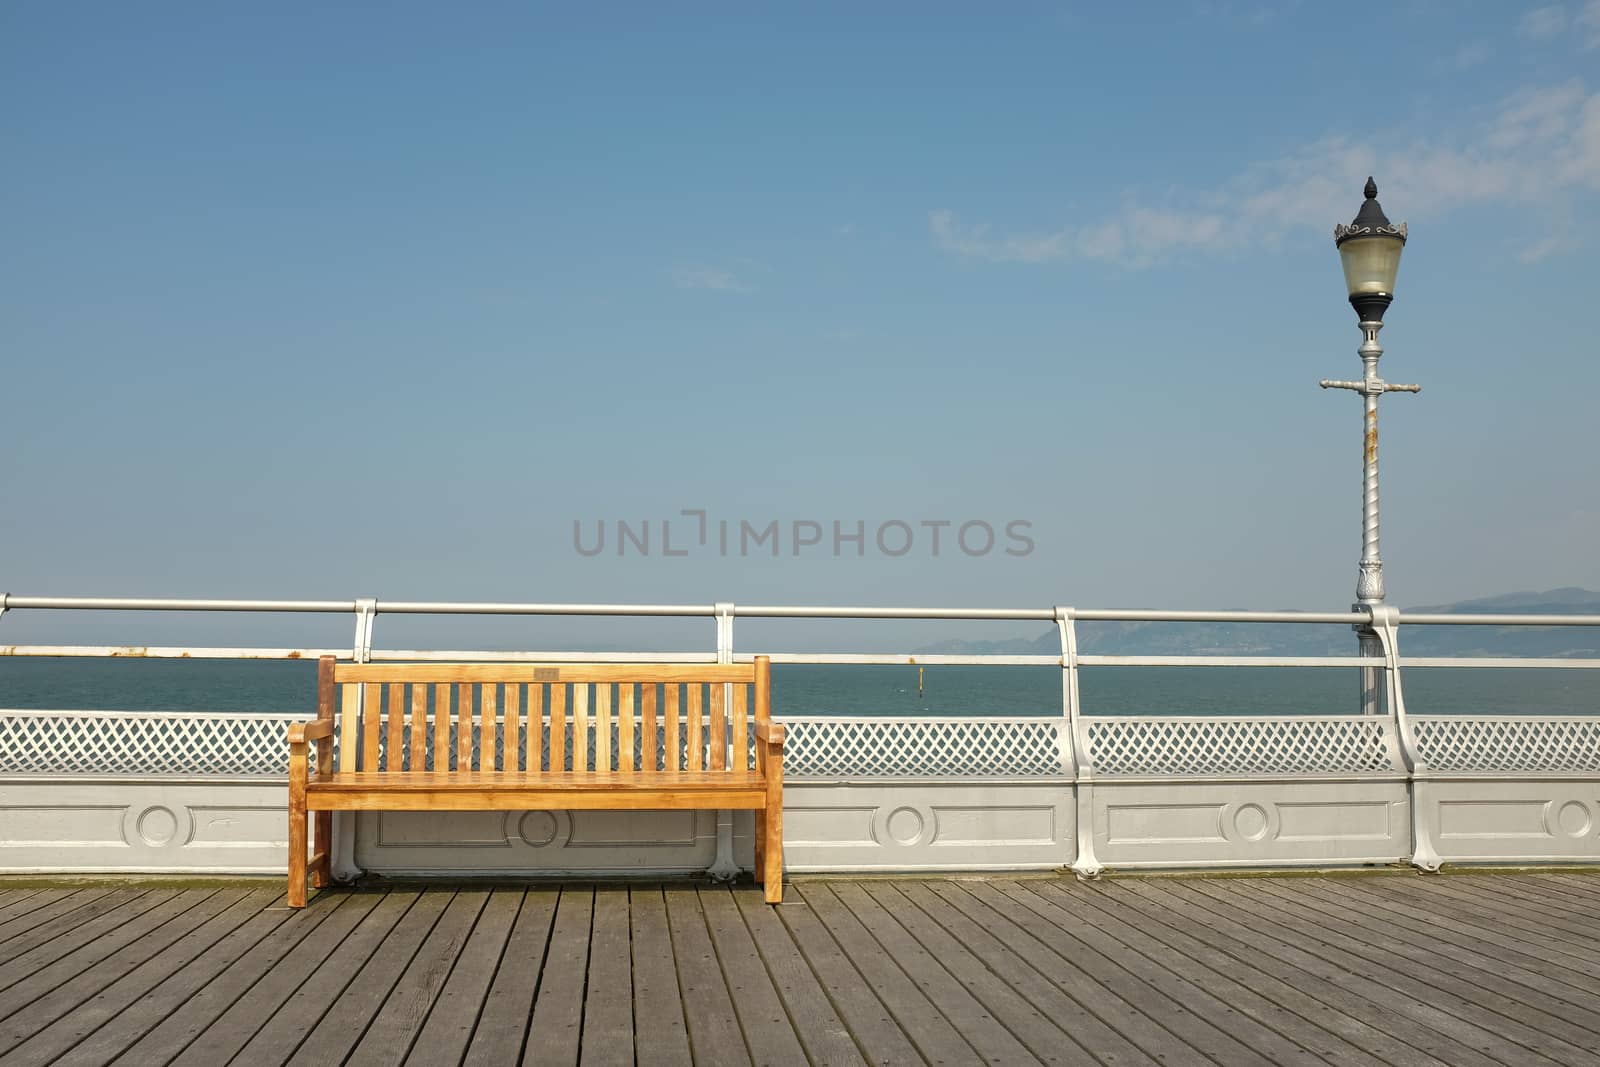 A wooden seat on a boardwalk against a silver painted railing with a light on a post against the sea and sky.